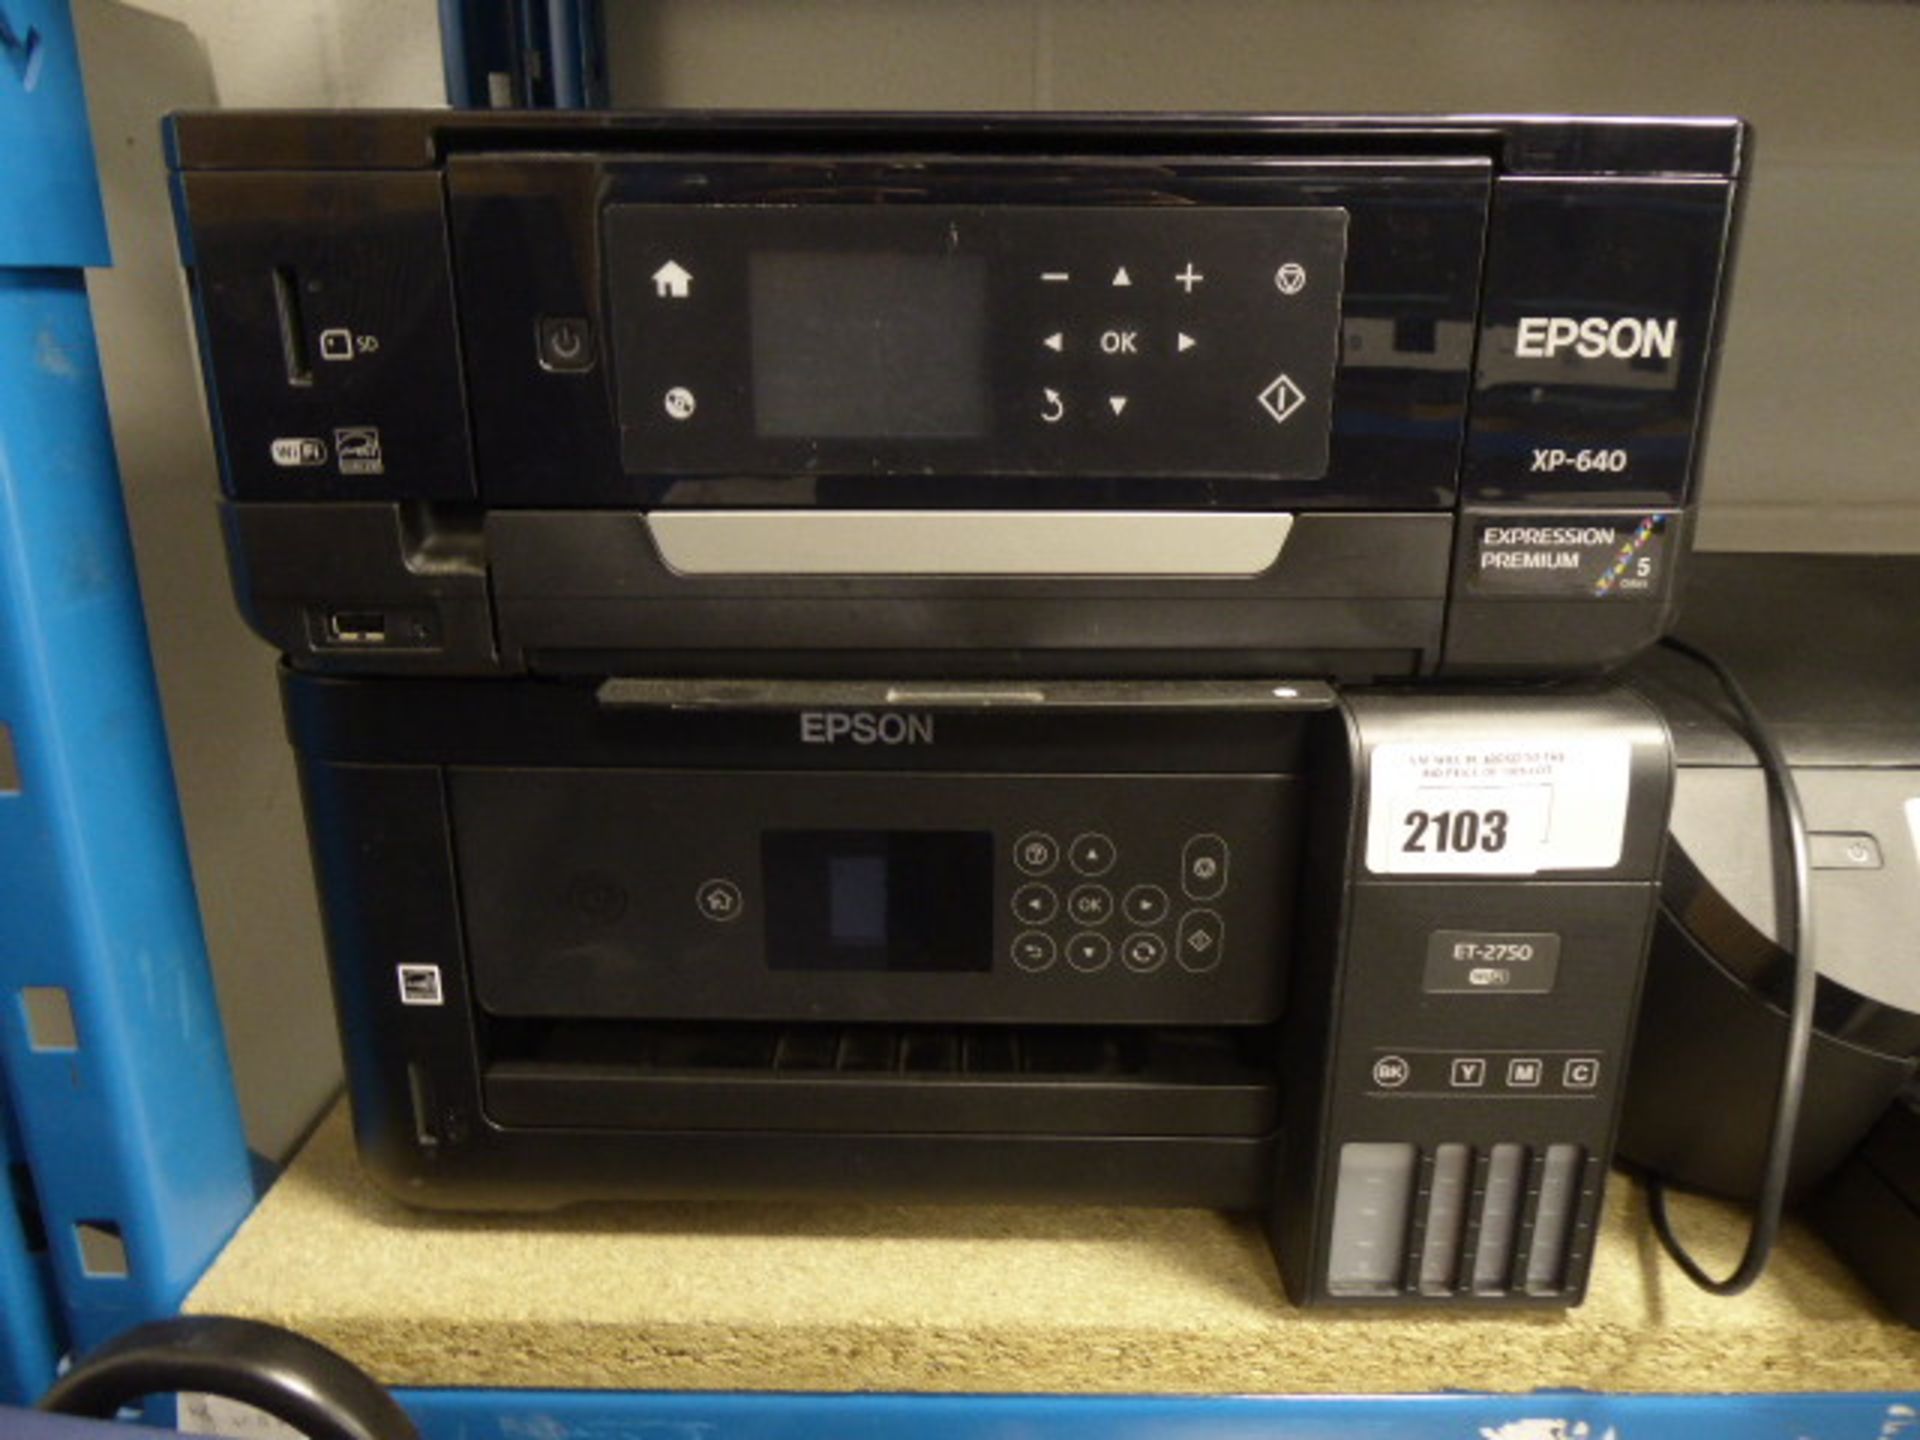 2117 - Epson XP640 and an Epson ET2750 printer - Image 2 of 2